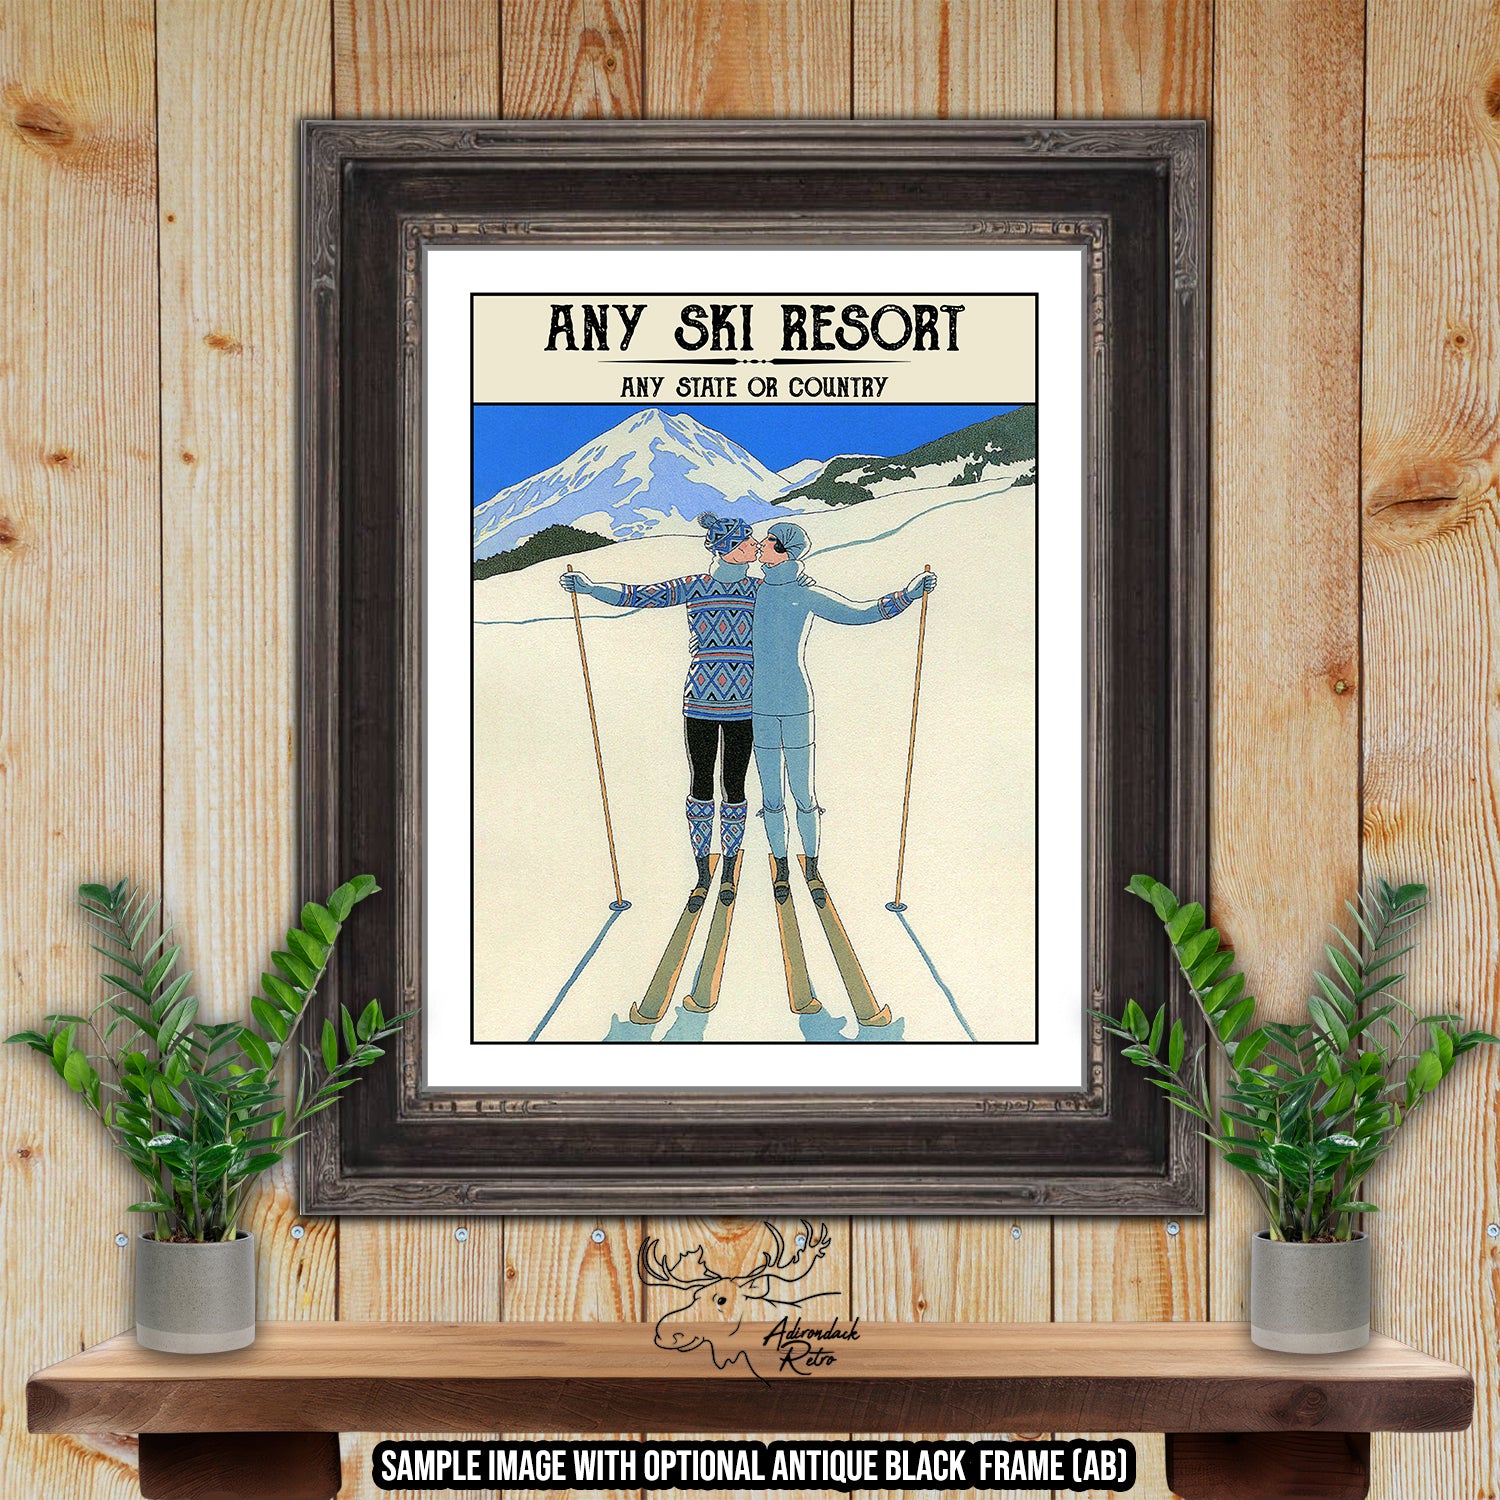 a picture of a man on skis on a shelf